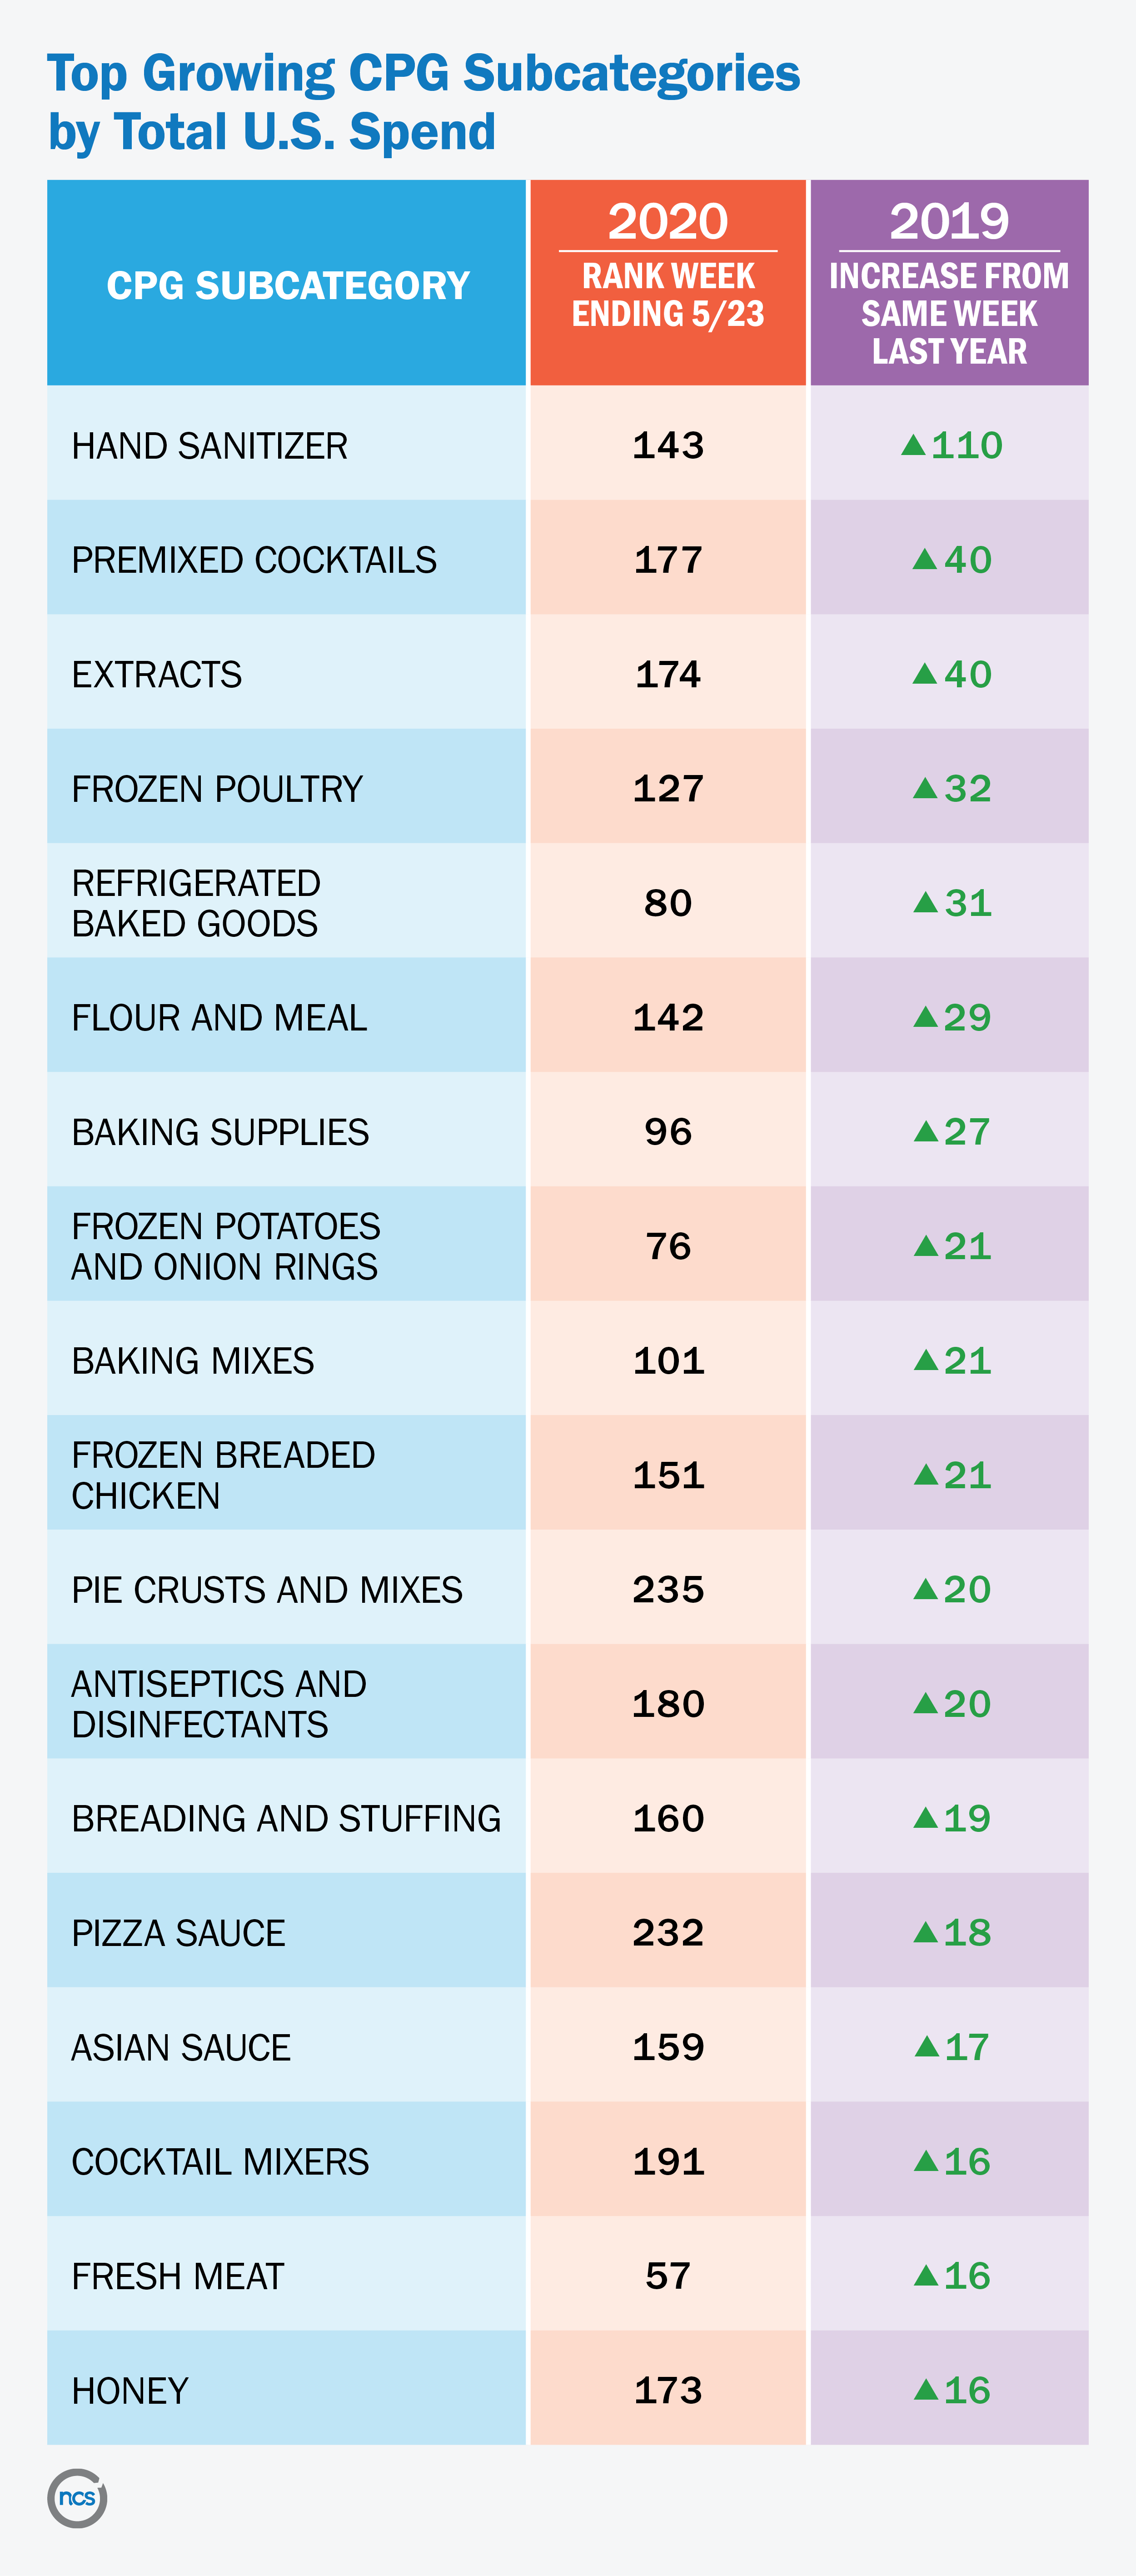 Top five growing CPG subcategories by total U.S. spend in the week of 5/23 of hand sanitizer, premixed cocktails, extracts, frozen poultry, and refrigerated baked goods.